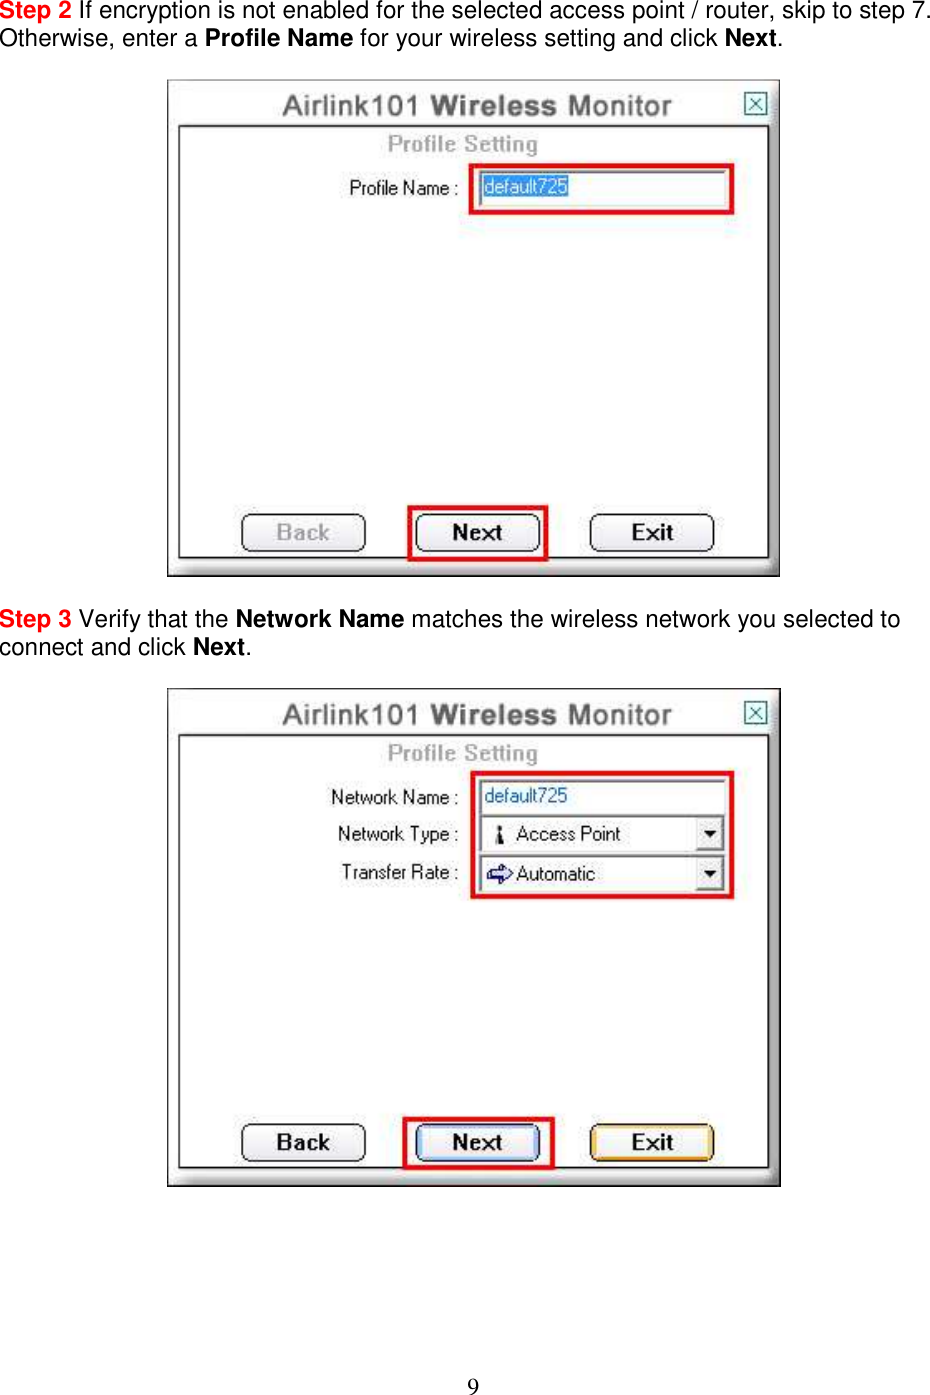 9 Step 2 If encryption is not enabled for the selected access point / router, skip to step 7. Otherwise, enter a Profile Name for your wireless setting and click Next.    Step 3 Verify that the Network Name matches the wireless network you selected to connect and click Next.        